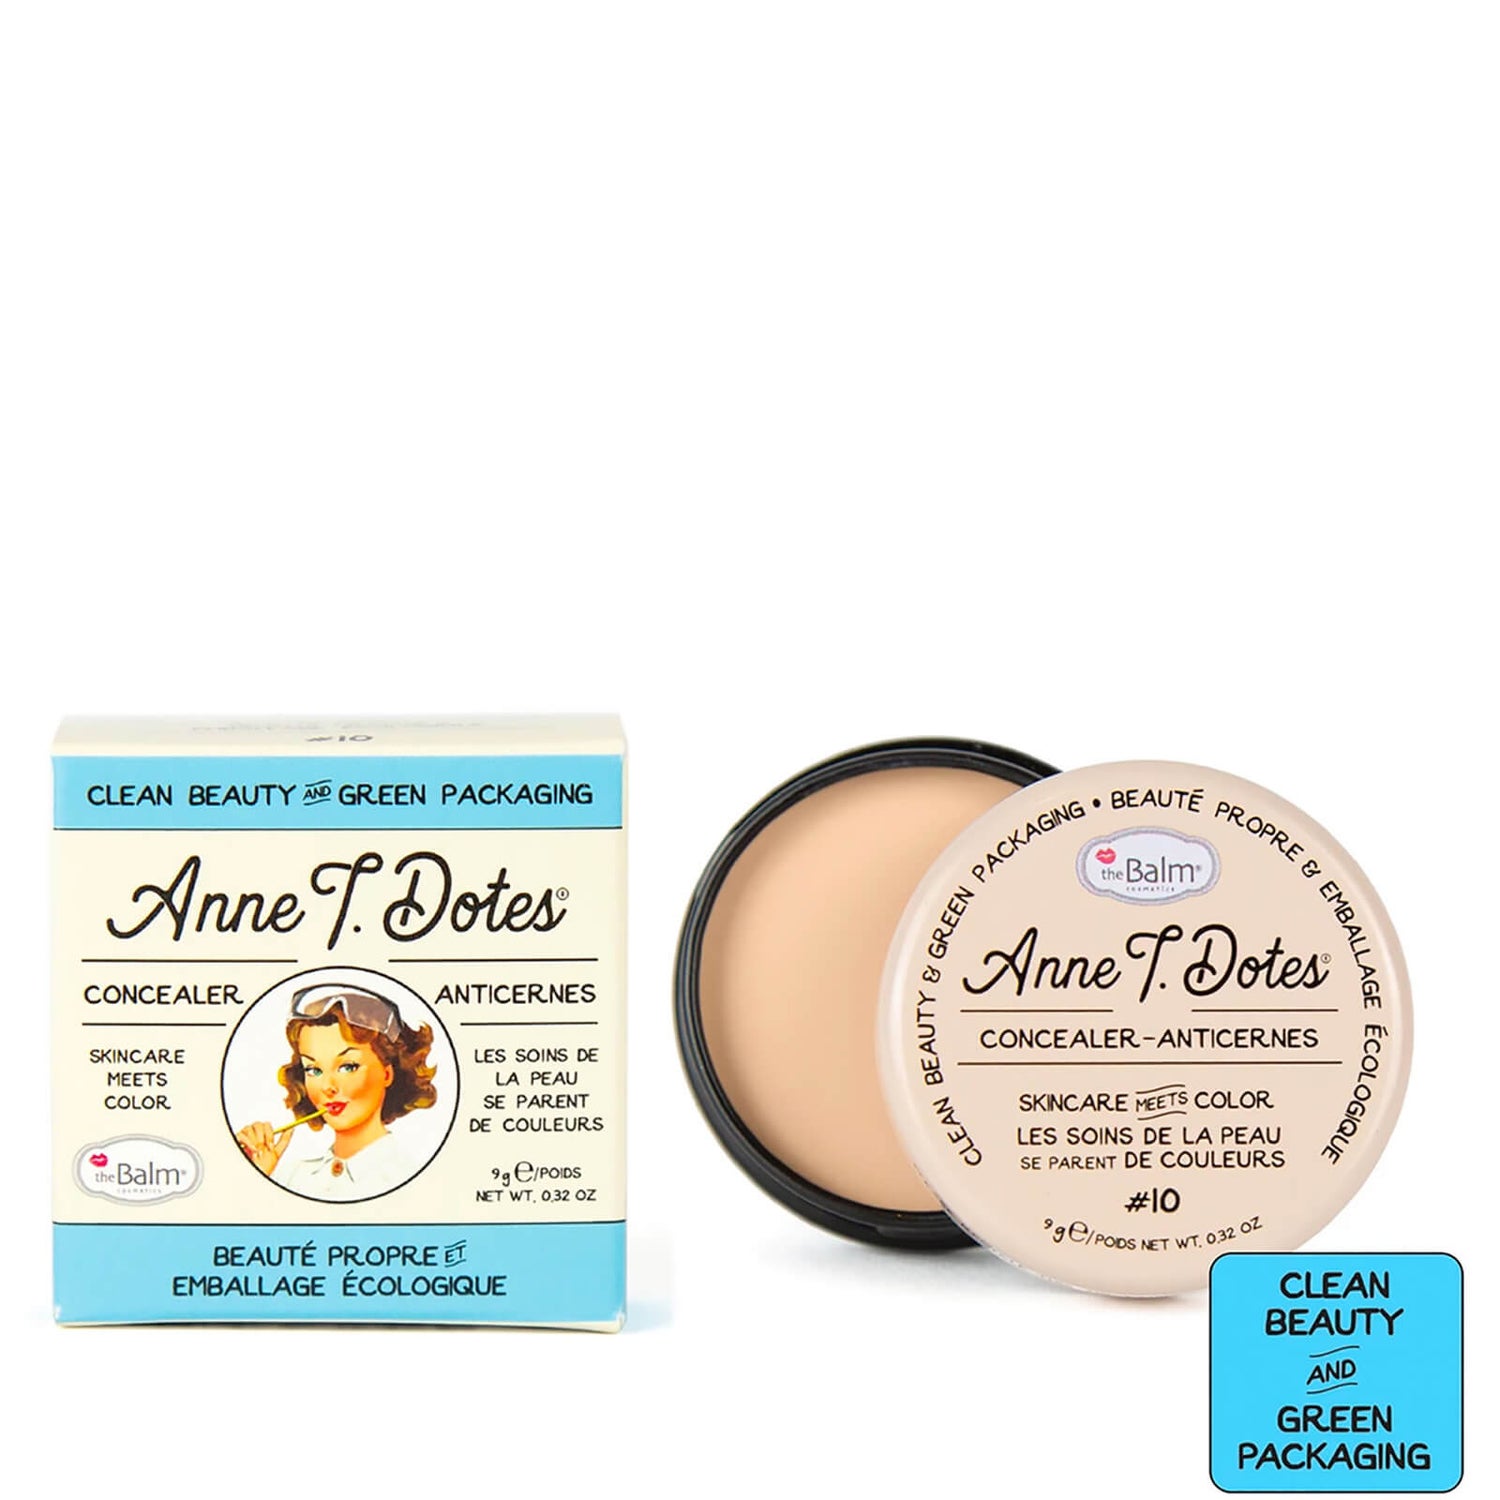 theBalm Anne T. Dotes Concealer 9g (Various Shades)